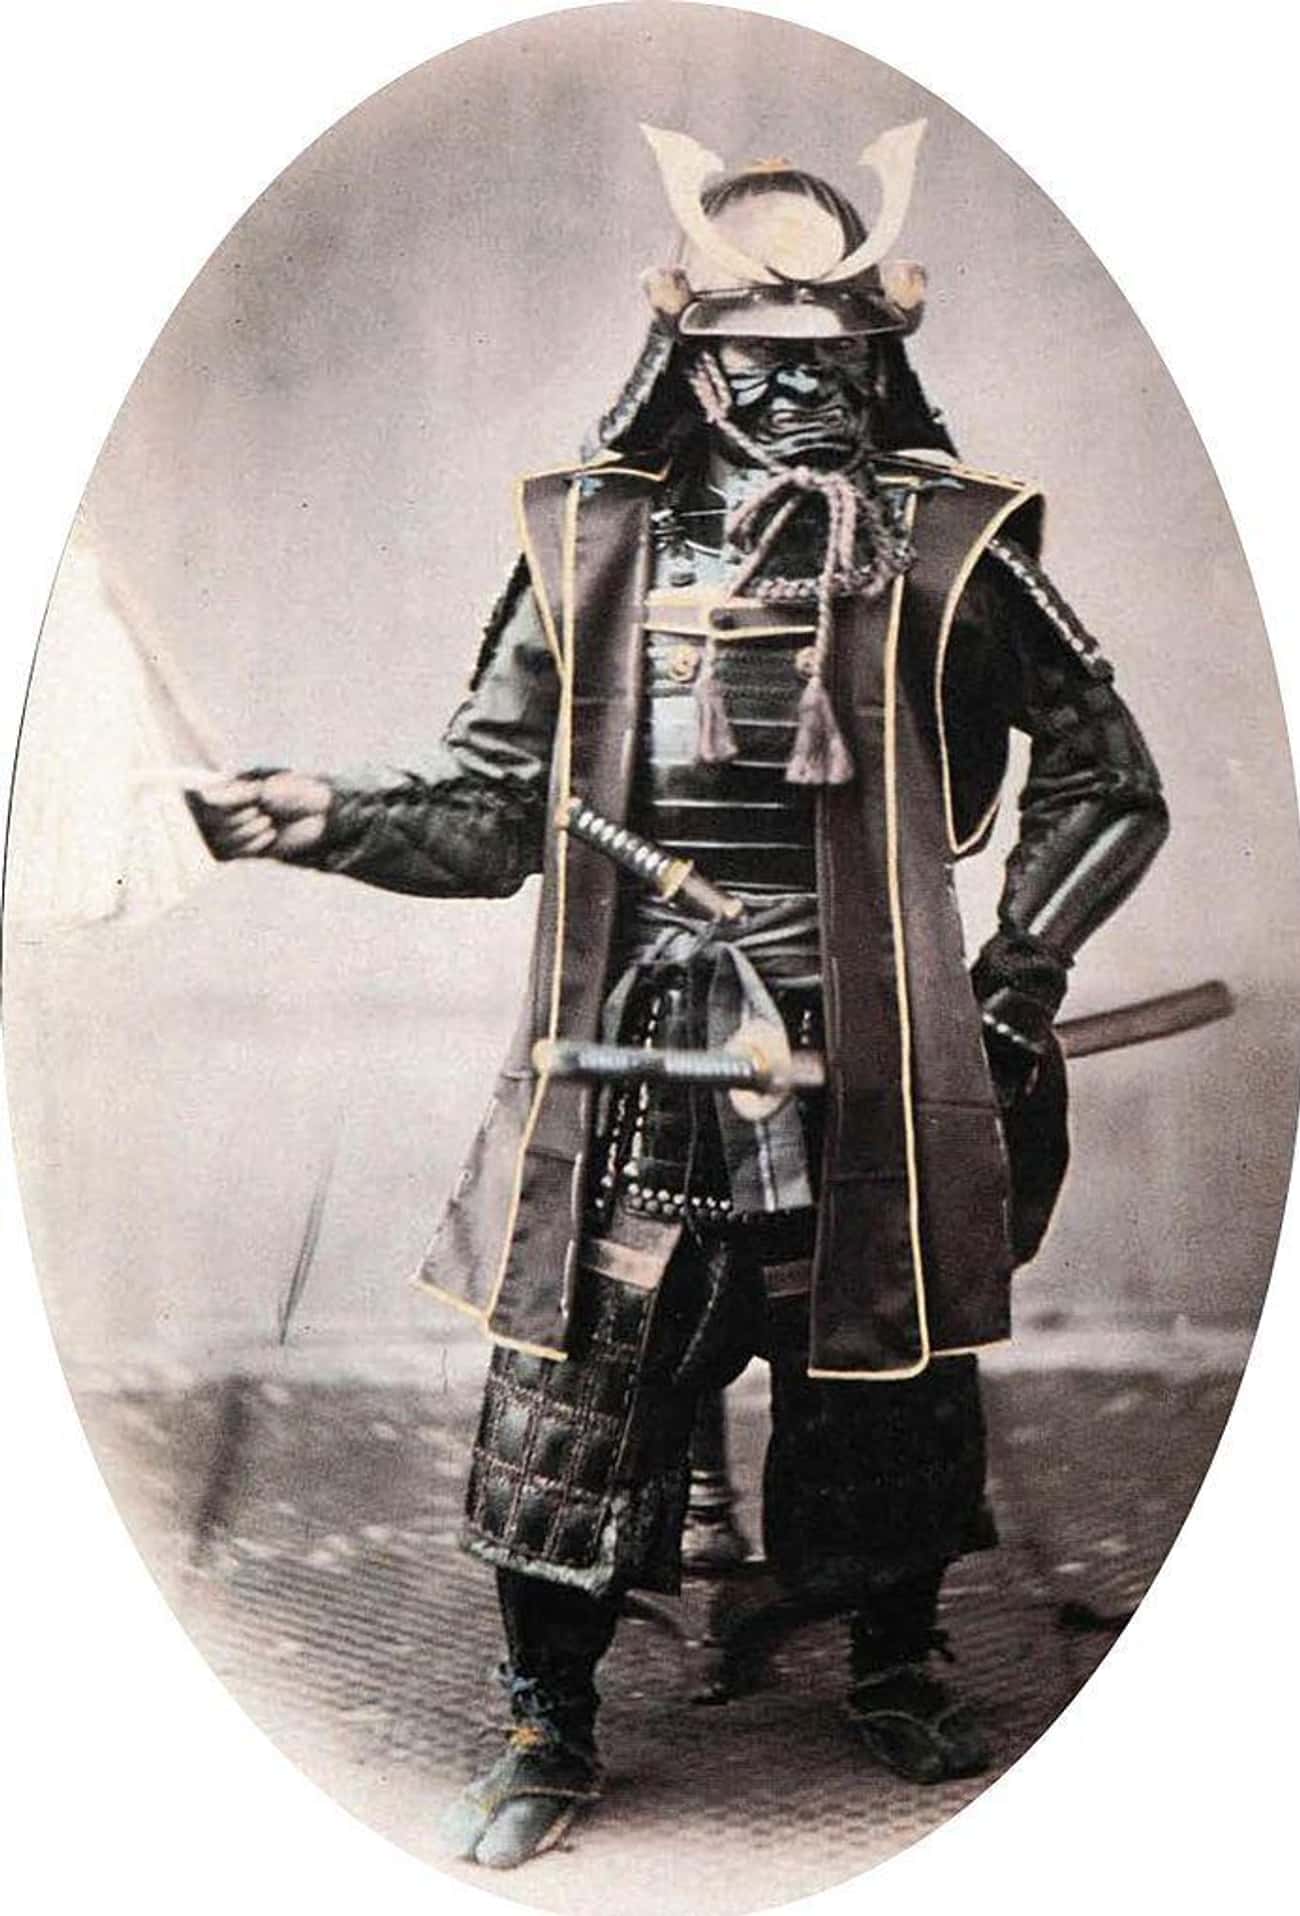 Samurai Armor Only Weighed 40-60 Pounds